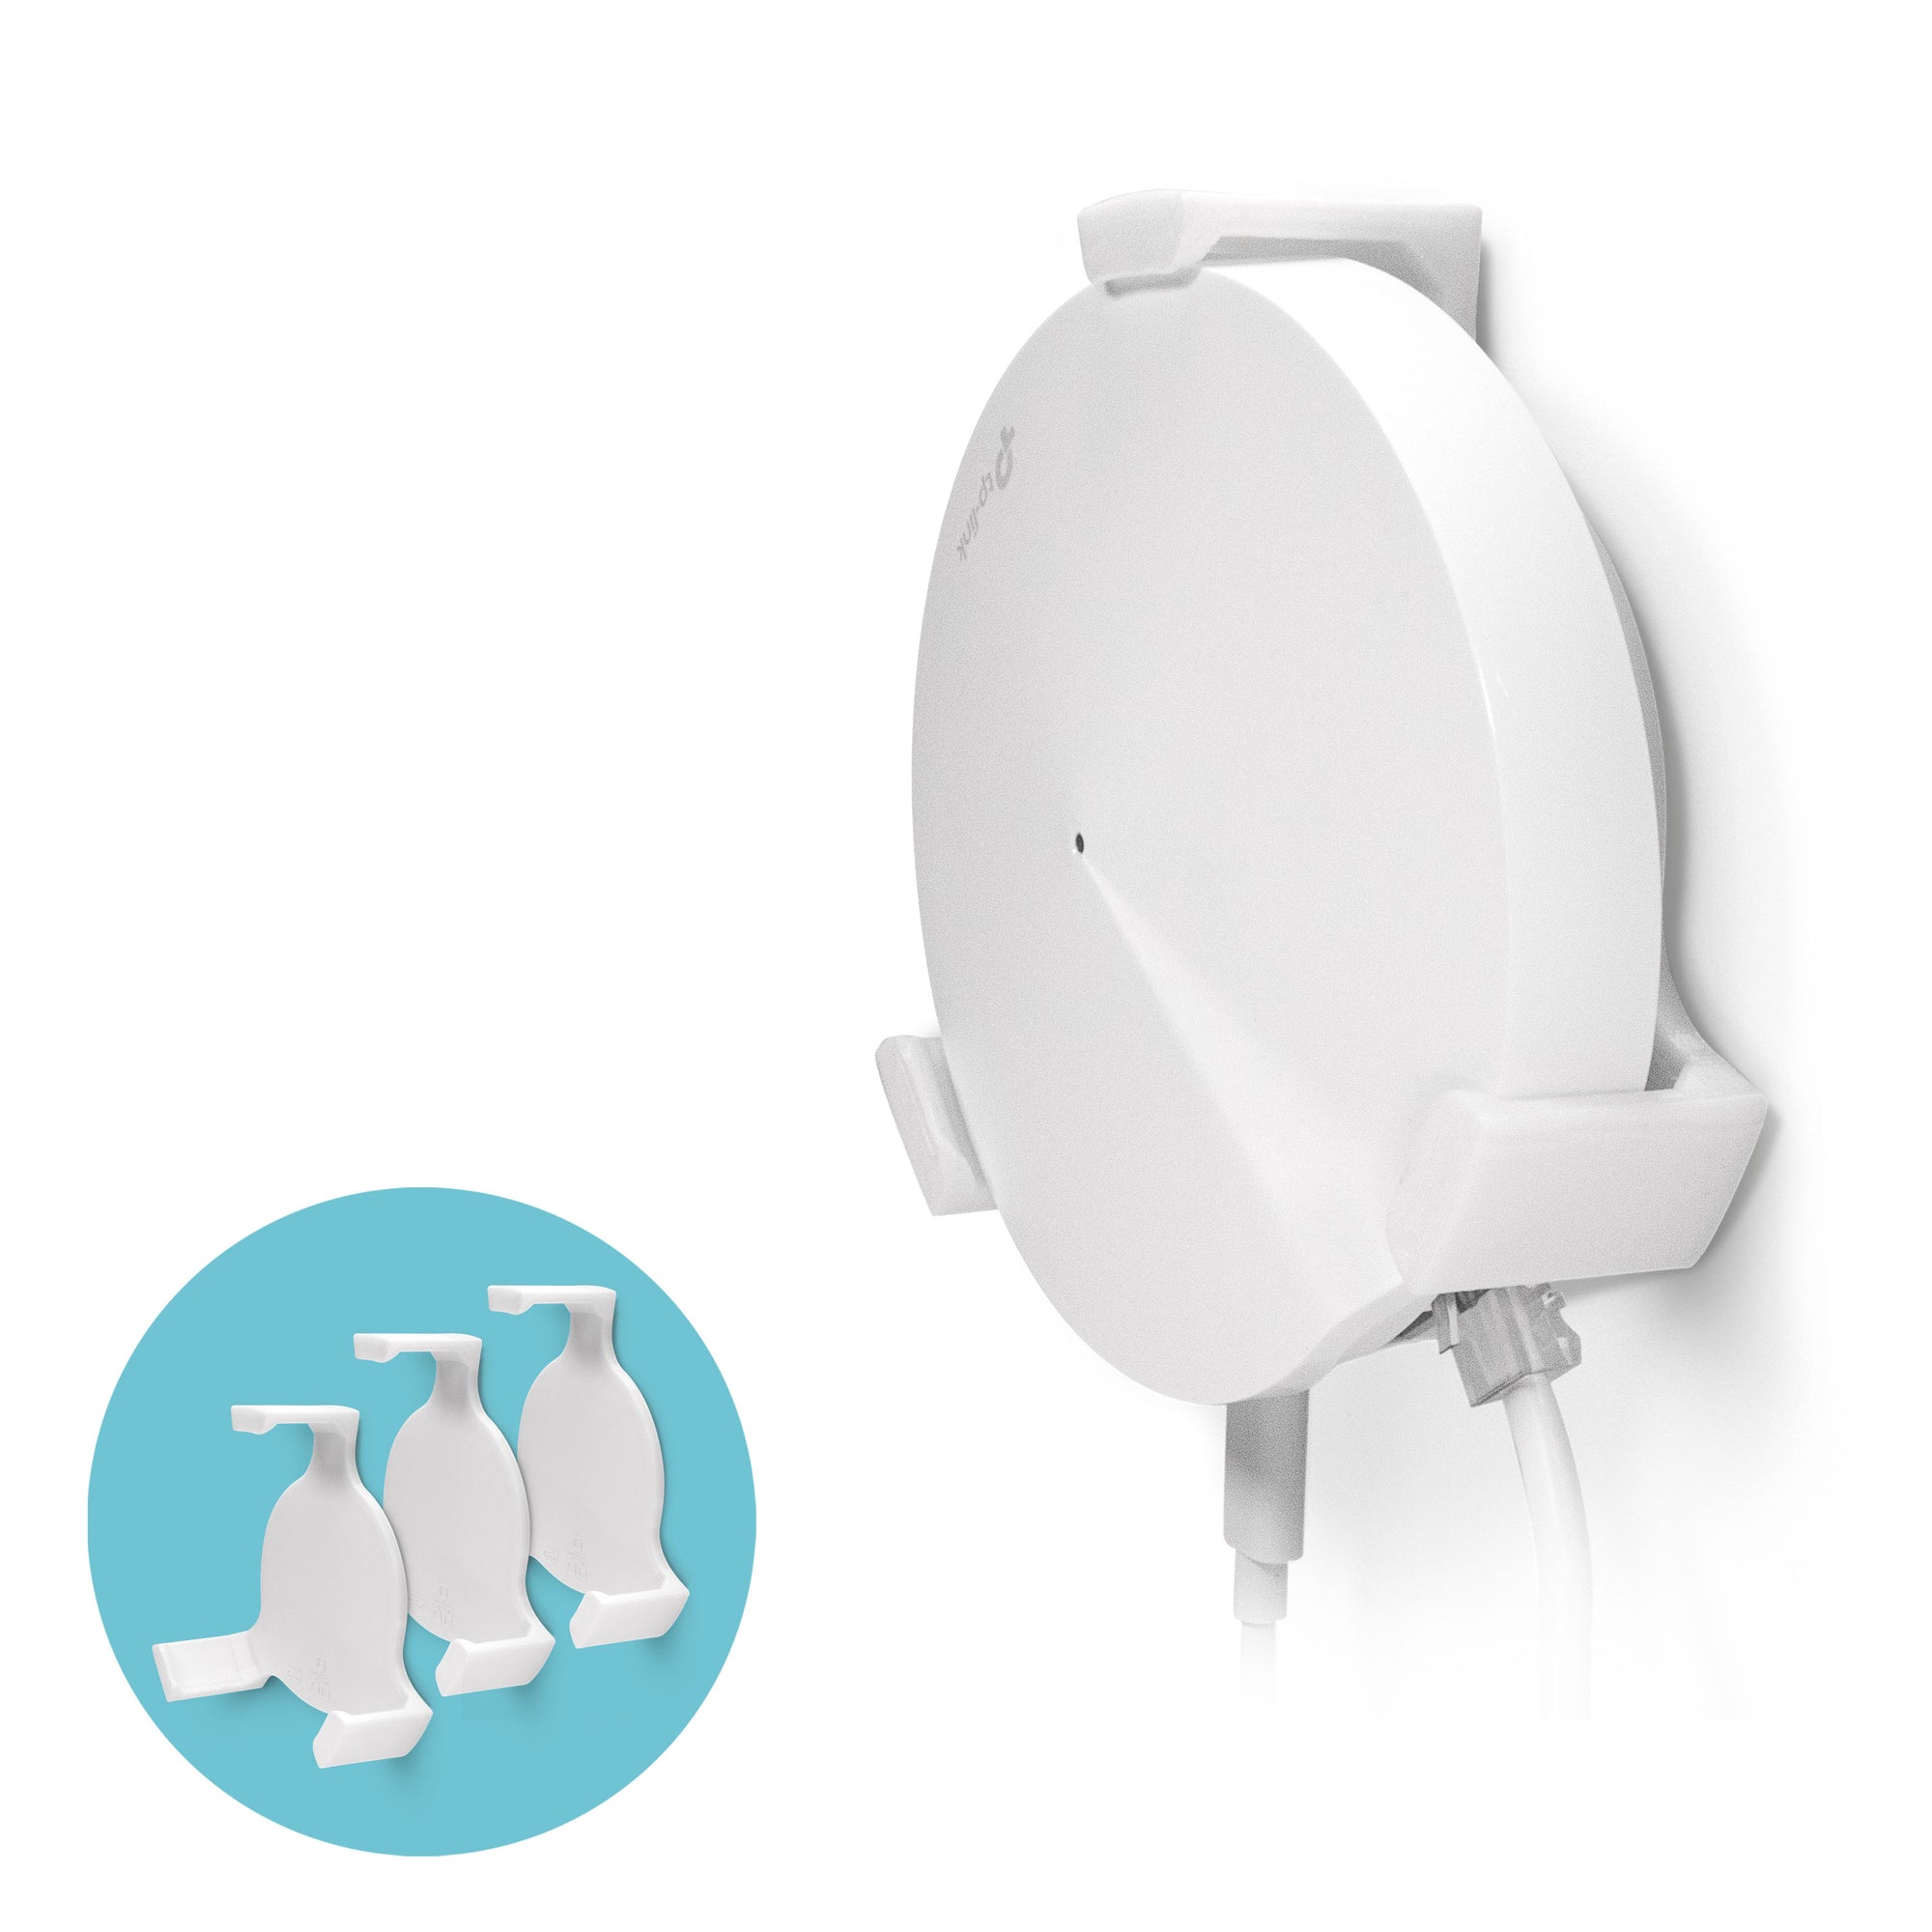 TP-Link Deco M5 & P7 Wall Mount Adhesive Bracket (3 Pack)